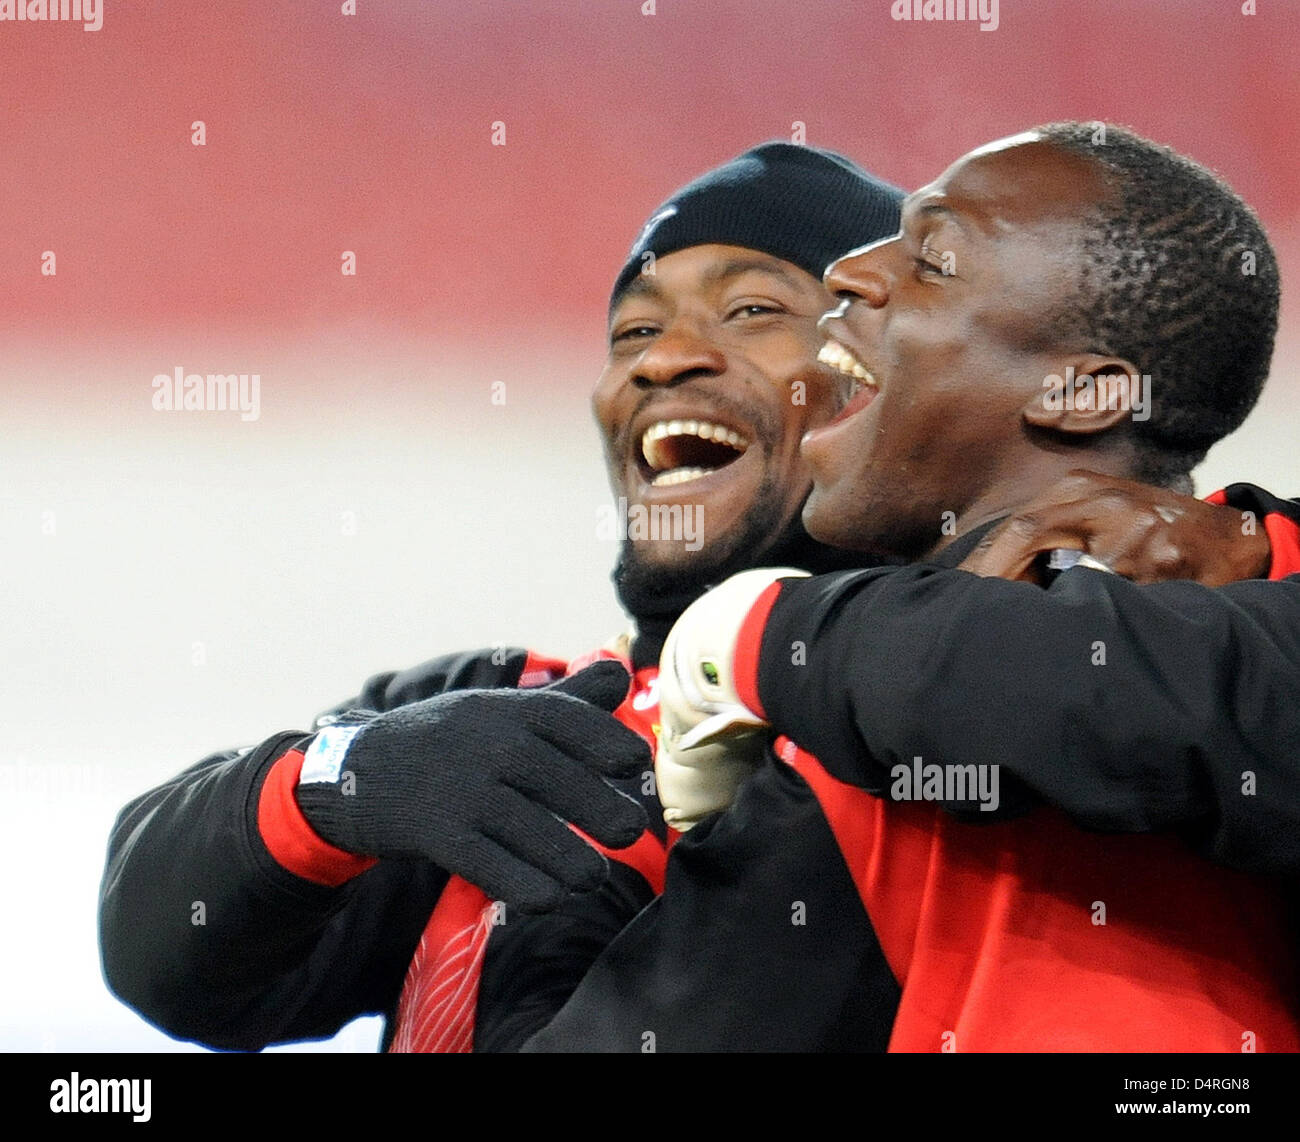 Didier Zokora (L) and Arouna Kone of Spanish first division soccer club FC Sevilla laugh during their practice session at Mercedes-Benz Arena in Stuttgart, Germany, 19 October 2009. Sevilla faces German Bundesliga side VfB Stuttgart in a Champions League group stage match to take place in Stuttgart the following day, 20 October 2009. Photo: BERND WEISSBROD Stock Photo